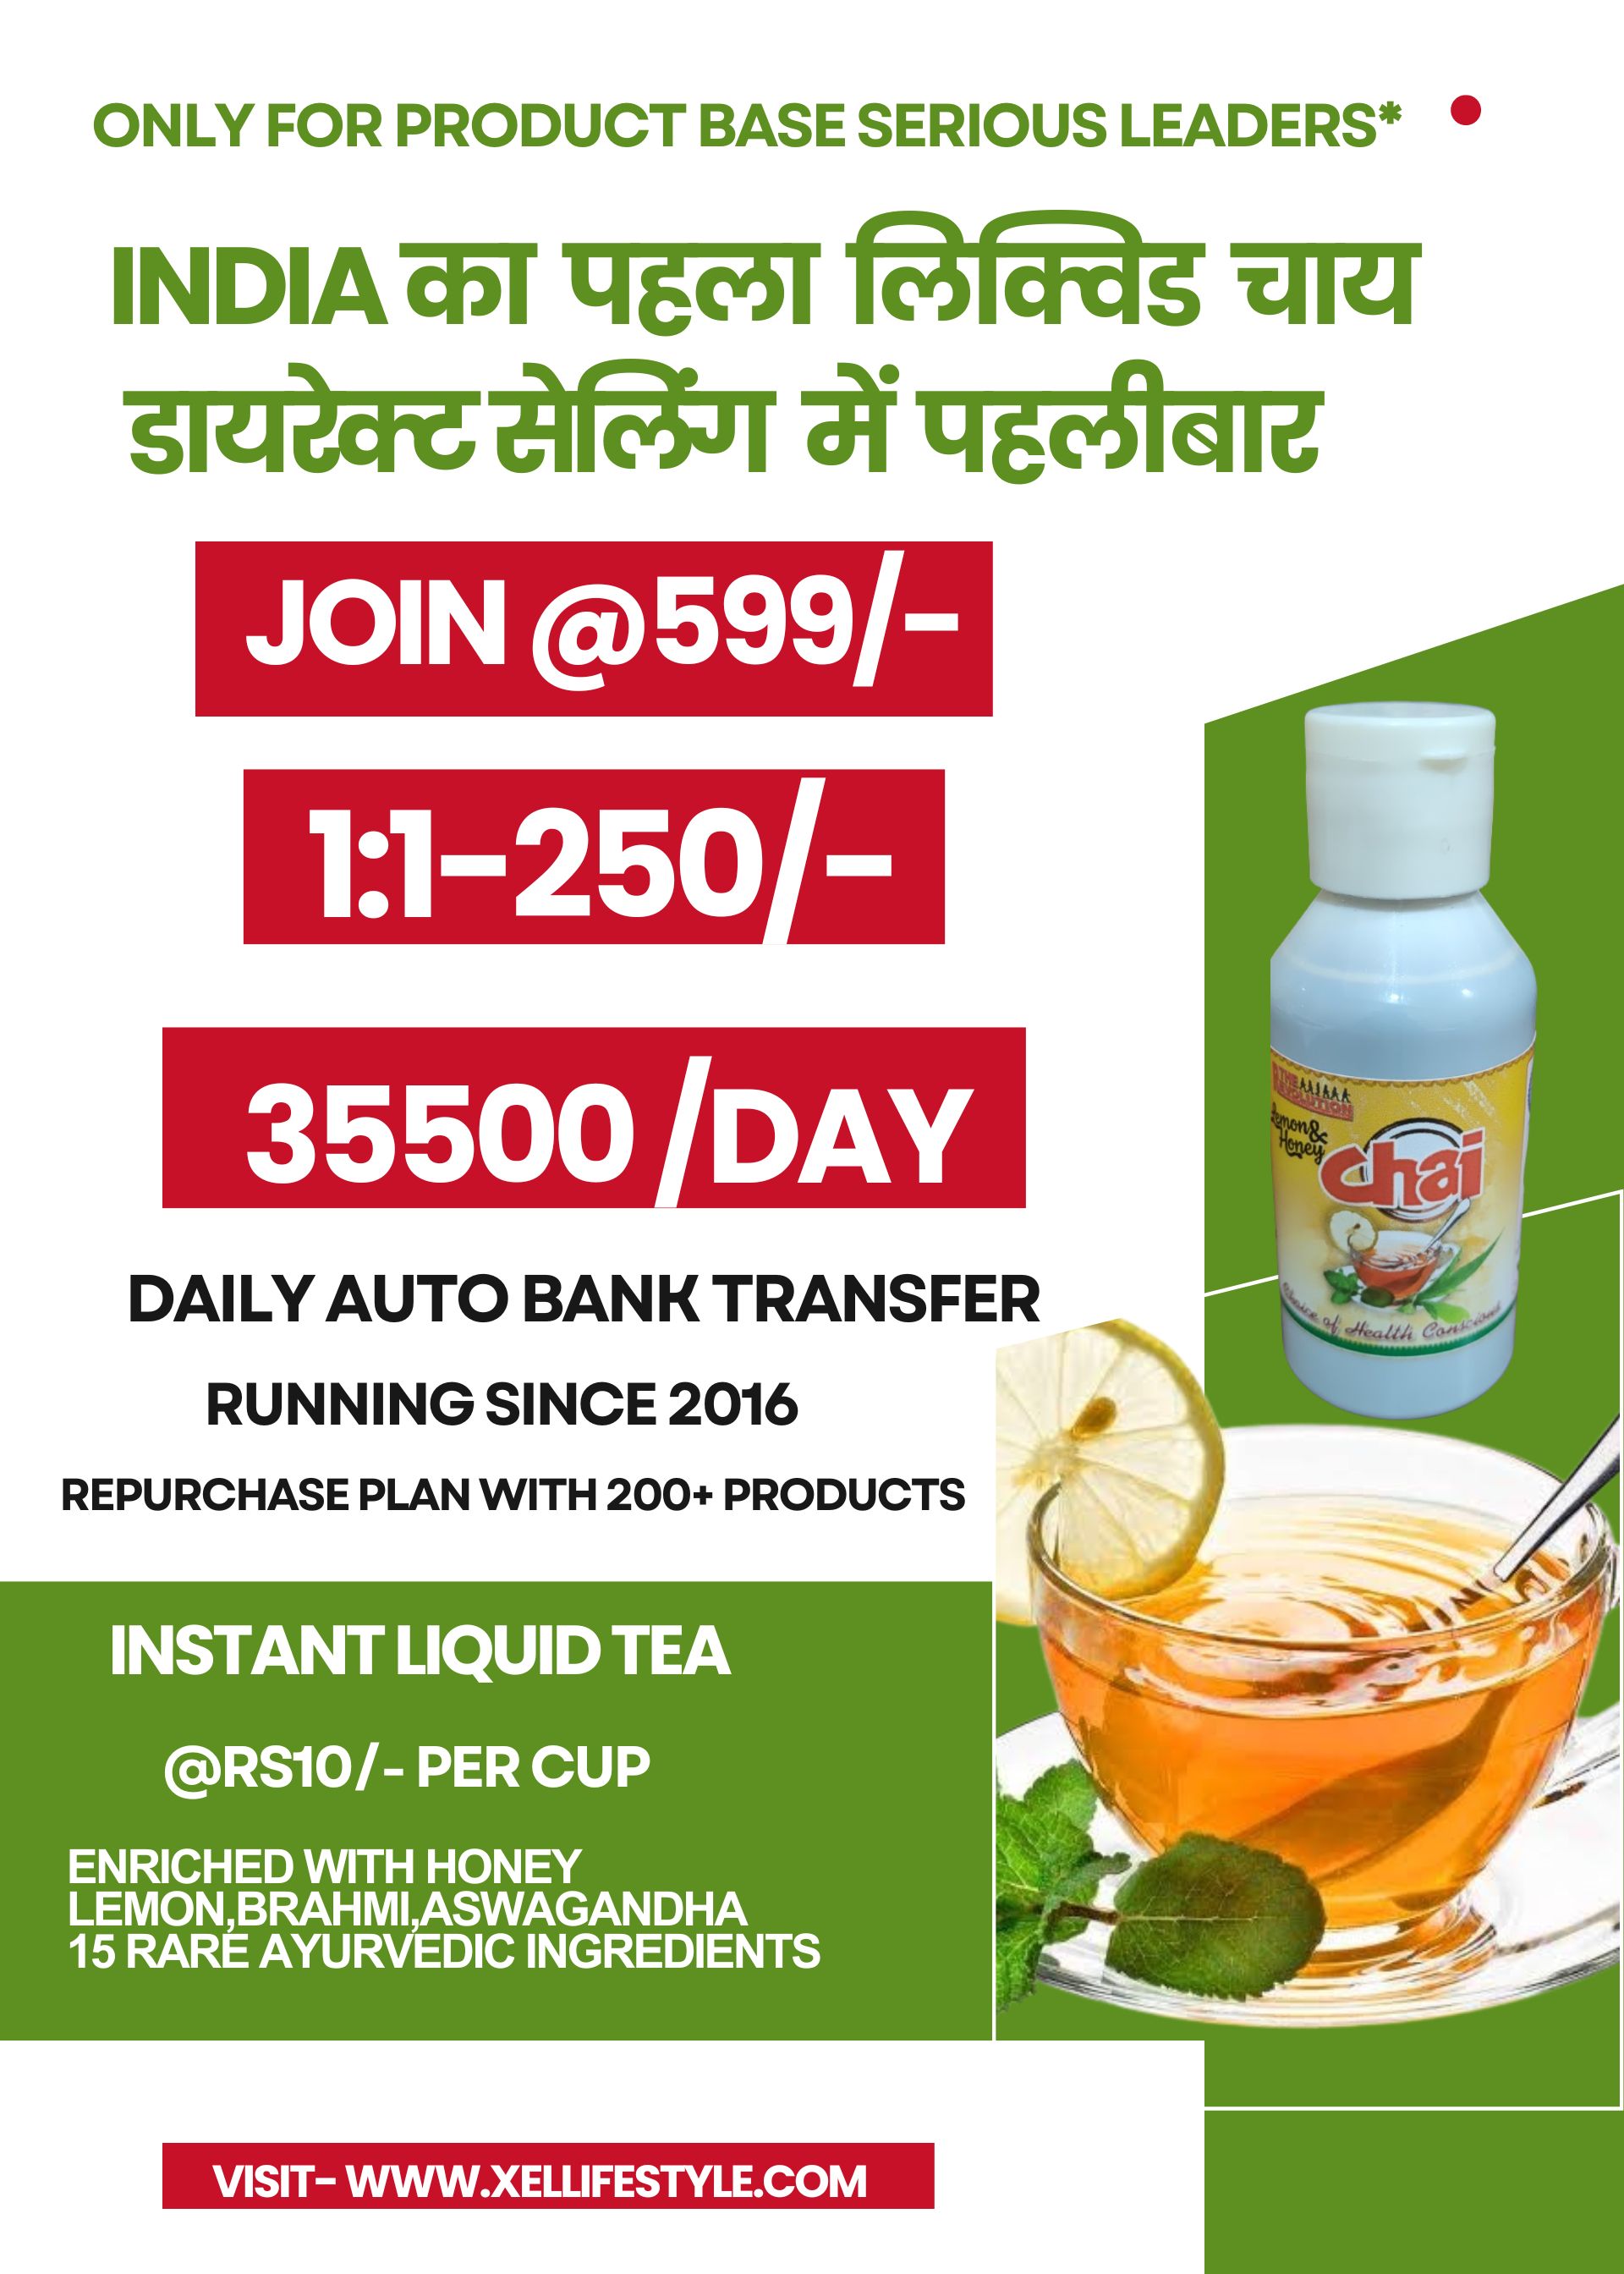 Join 599 Matching 1:1-250 Daily Upto 36000 Call-9090780808